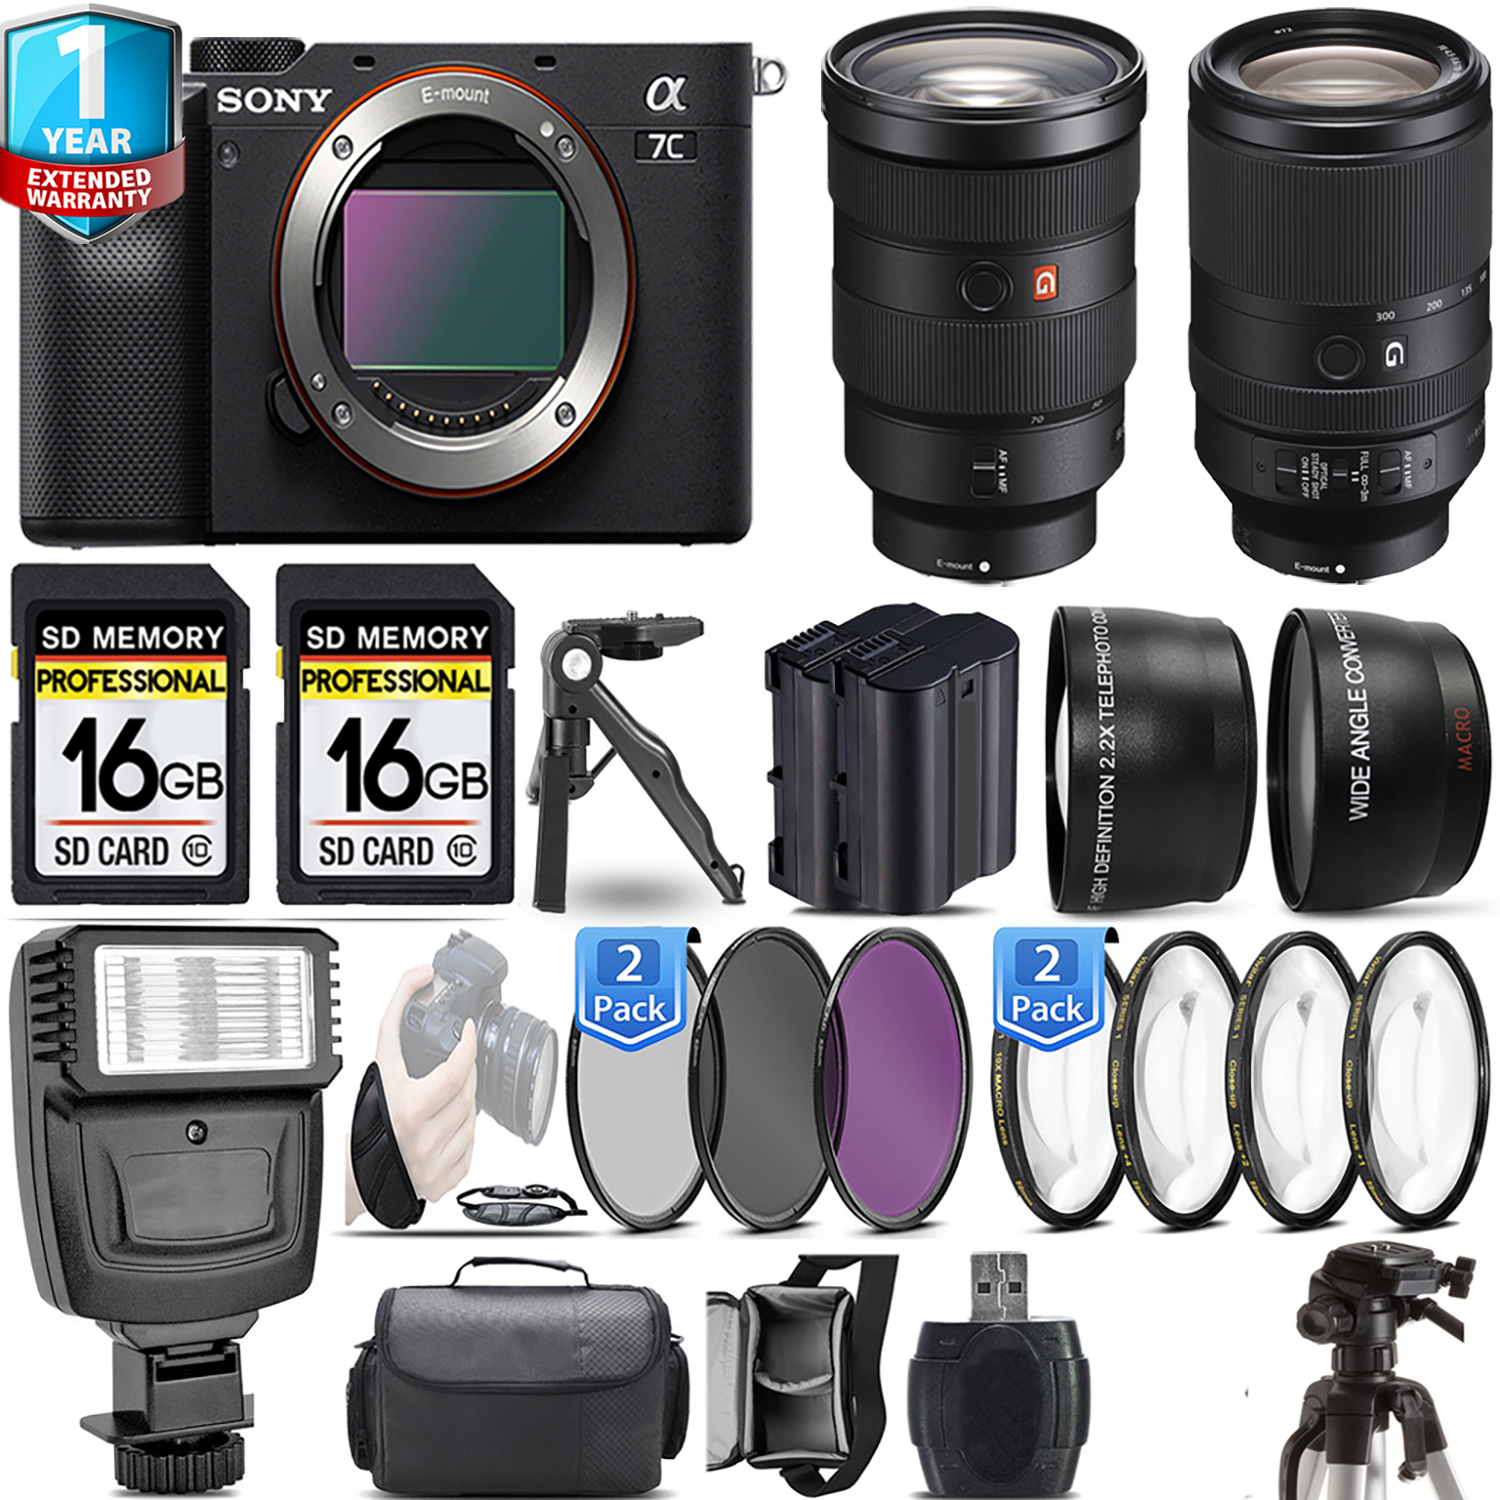 Alpha a7C Camera (Black) + 24-70mm Lens + 70- 300mm + 1 Year Extended Warranty + 3 Piece Filter Set- Kit *FREE SHIPPING*